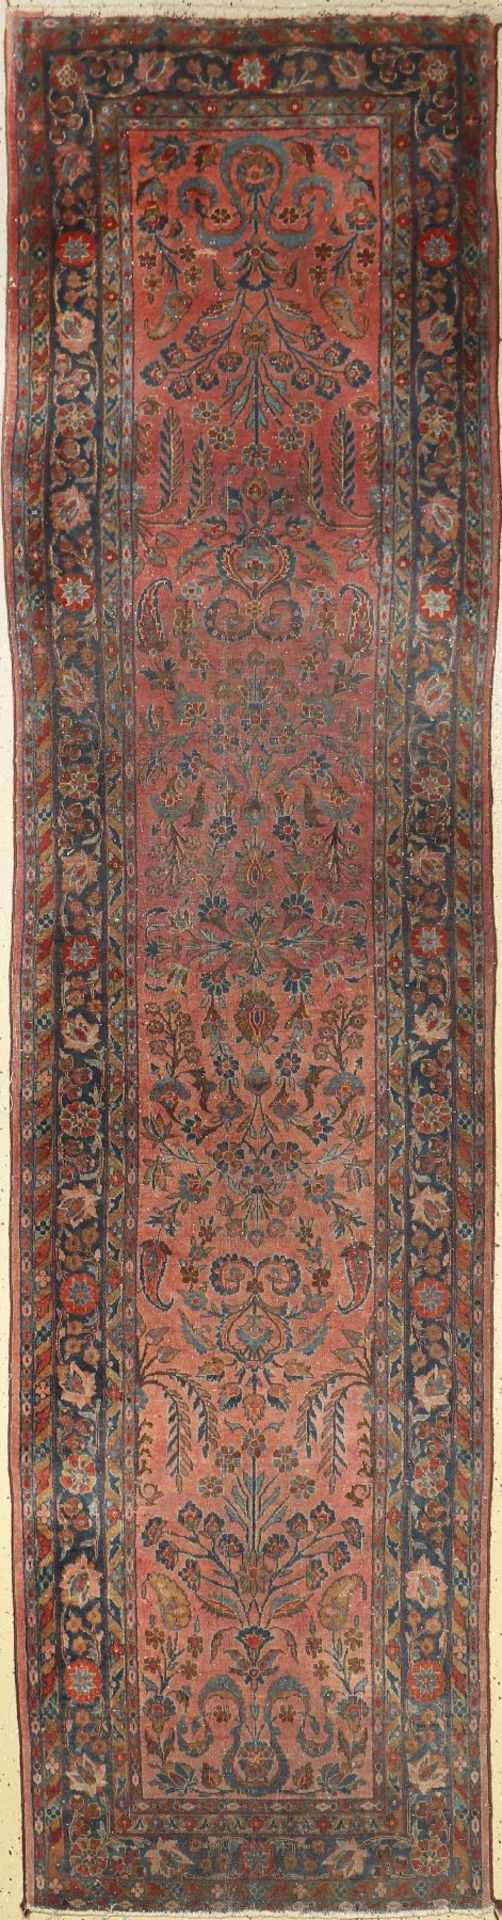 Us Keschan, Persia, around 1900, wool, approx.299 x 74 cm, condition: 4-5. Auction: Antique,old